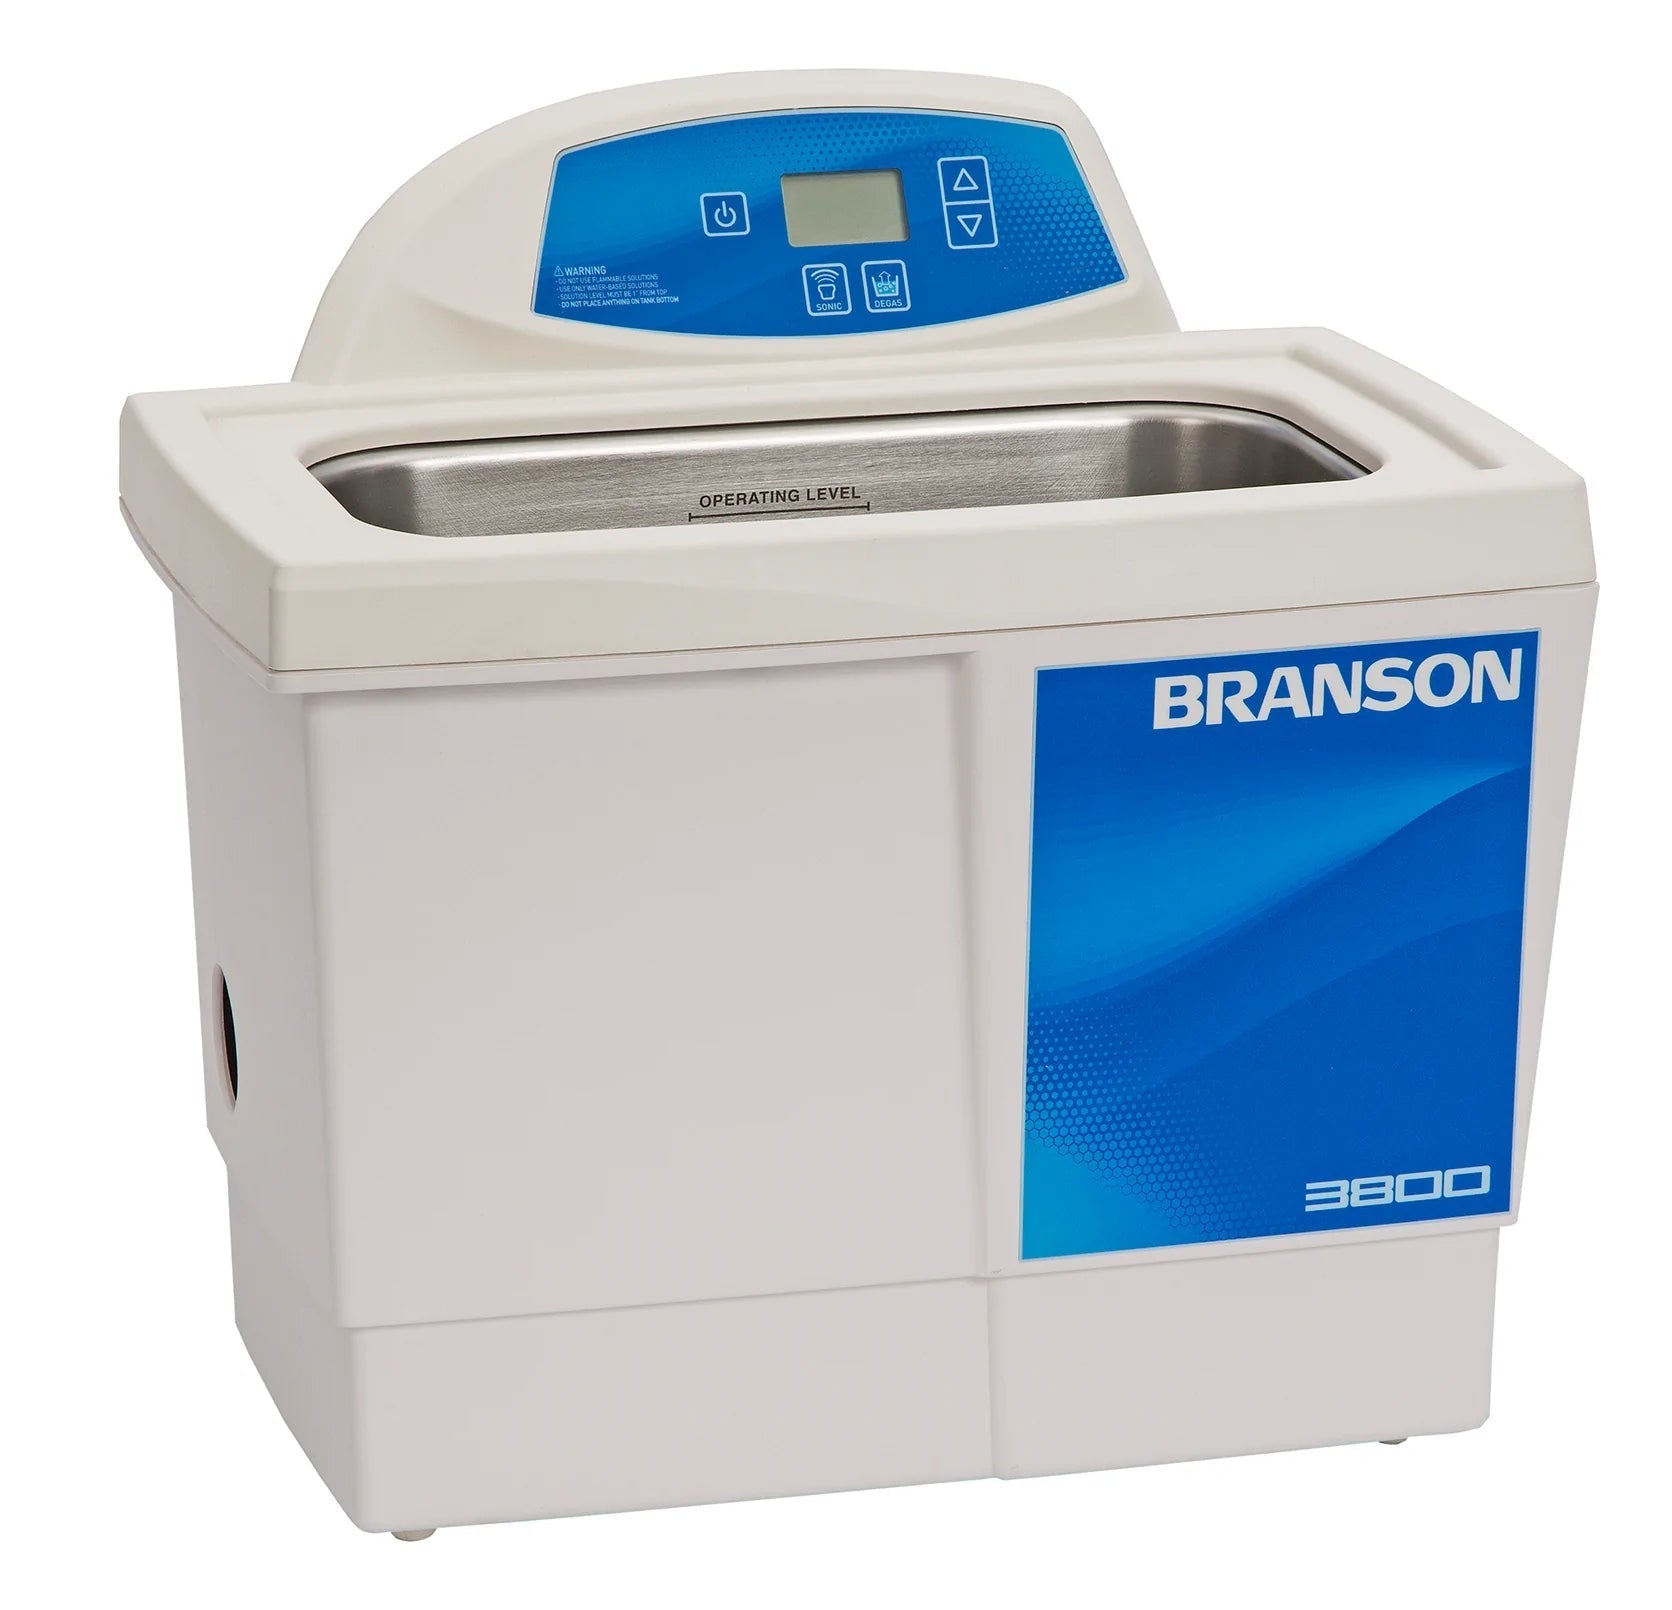 stainless-steel-mesh-basket-for-branson-3500-3800-ultrasonic-cleaners-100-916-335